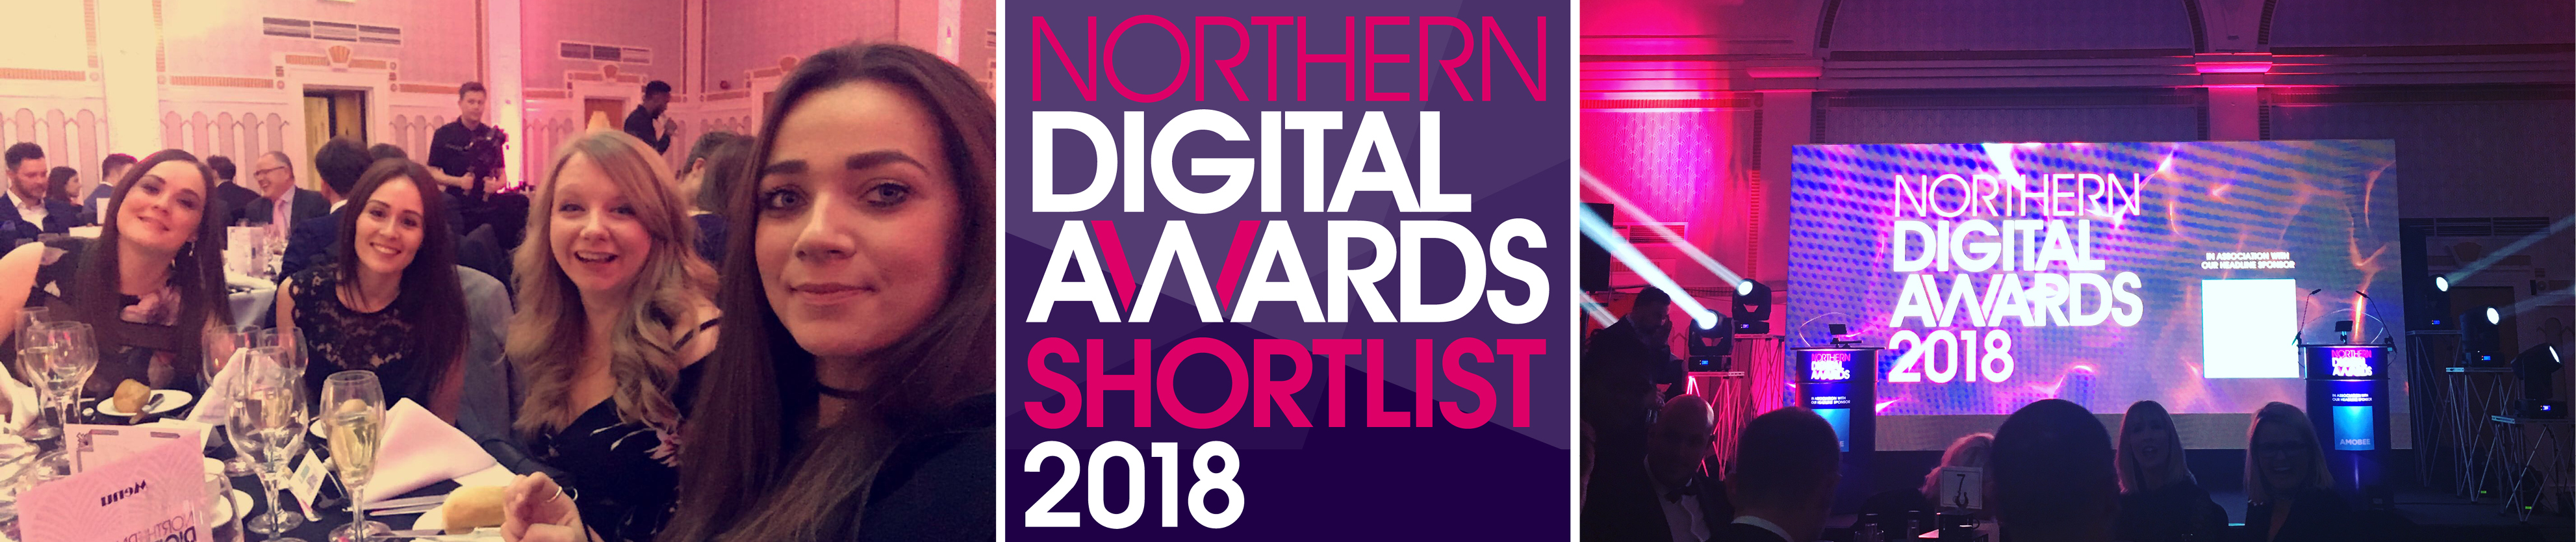 Entyce attend the 2018 Northern Digital Awards